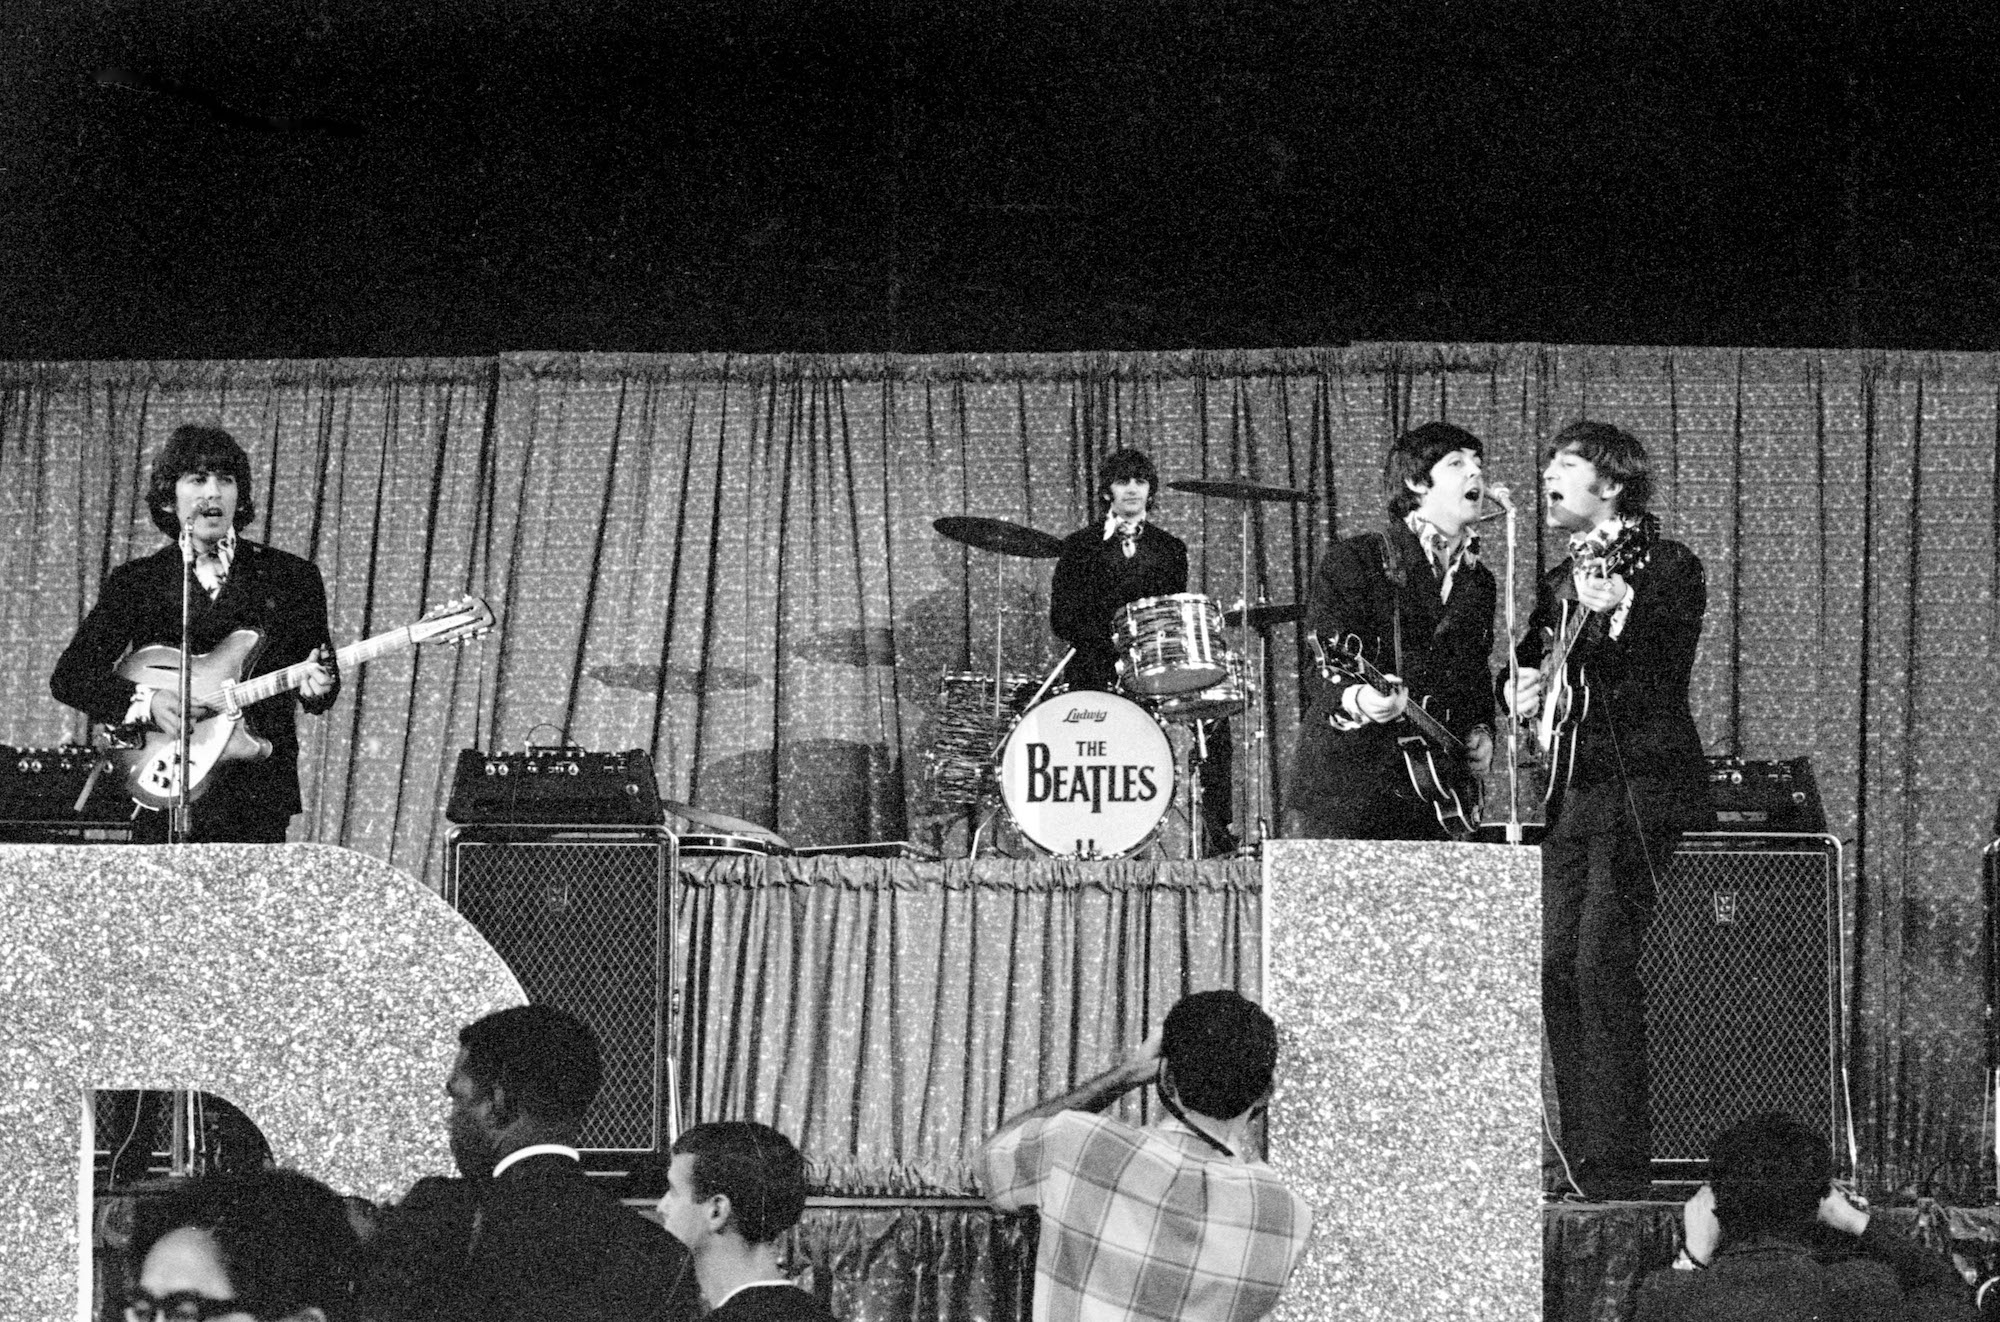 The Beatles perform at Dodger Stadium in 1966